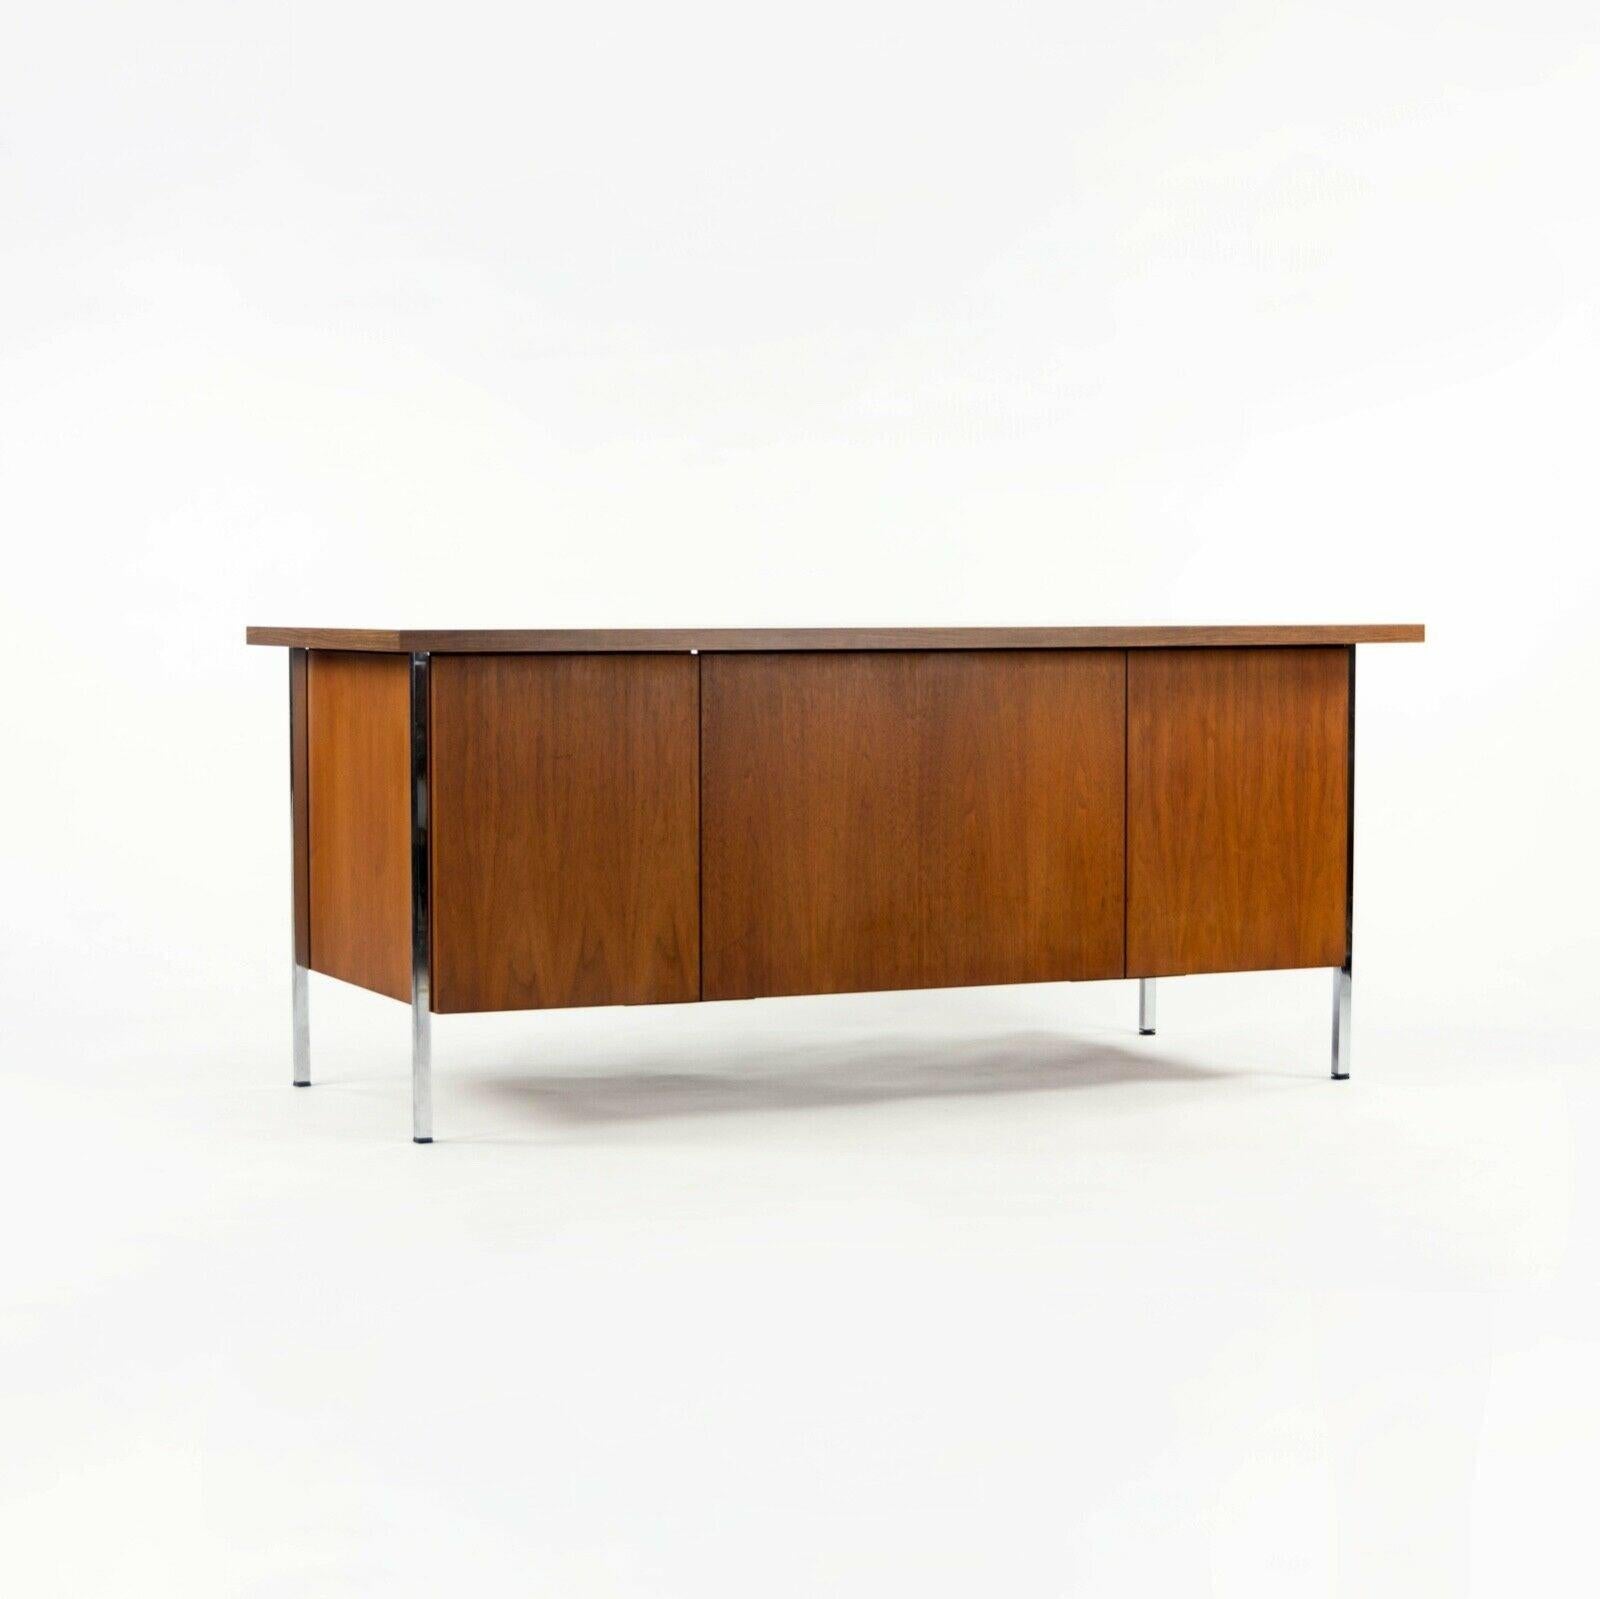 1950s Florence Knoll Double Pedestal Walnut Chrome and Laminate Executive Desk In Good Condition For Sale In Philadelphia, PA